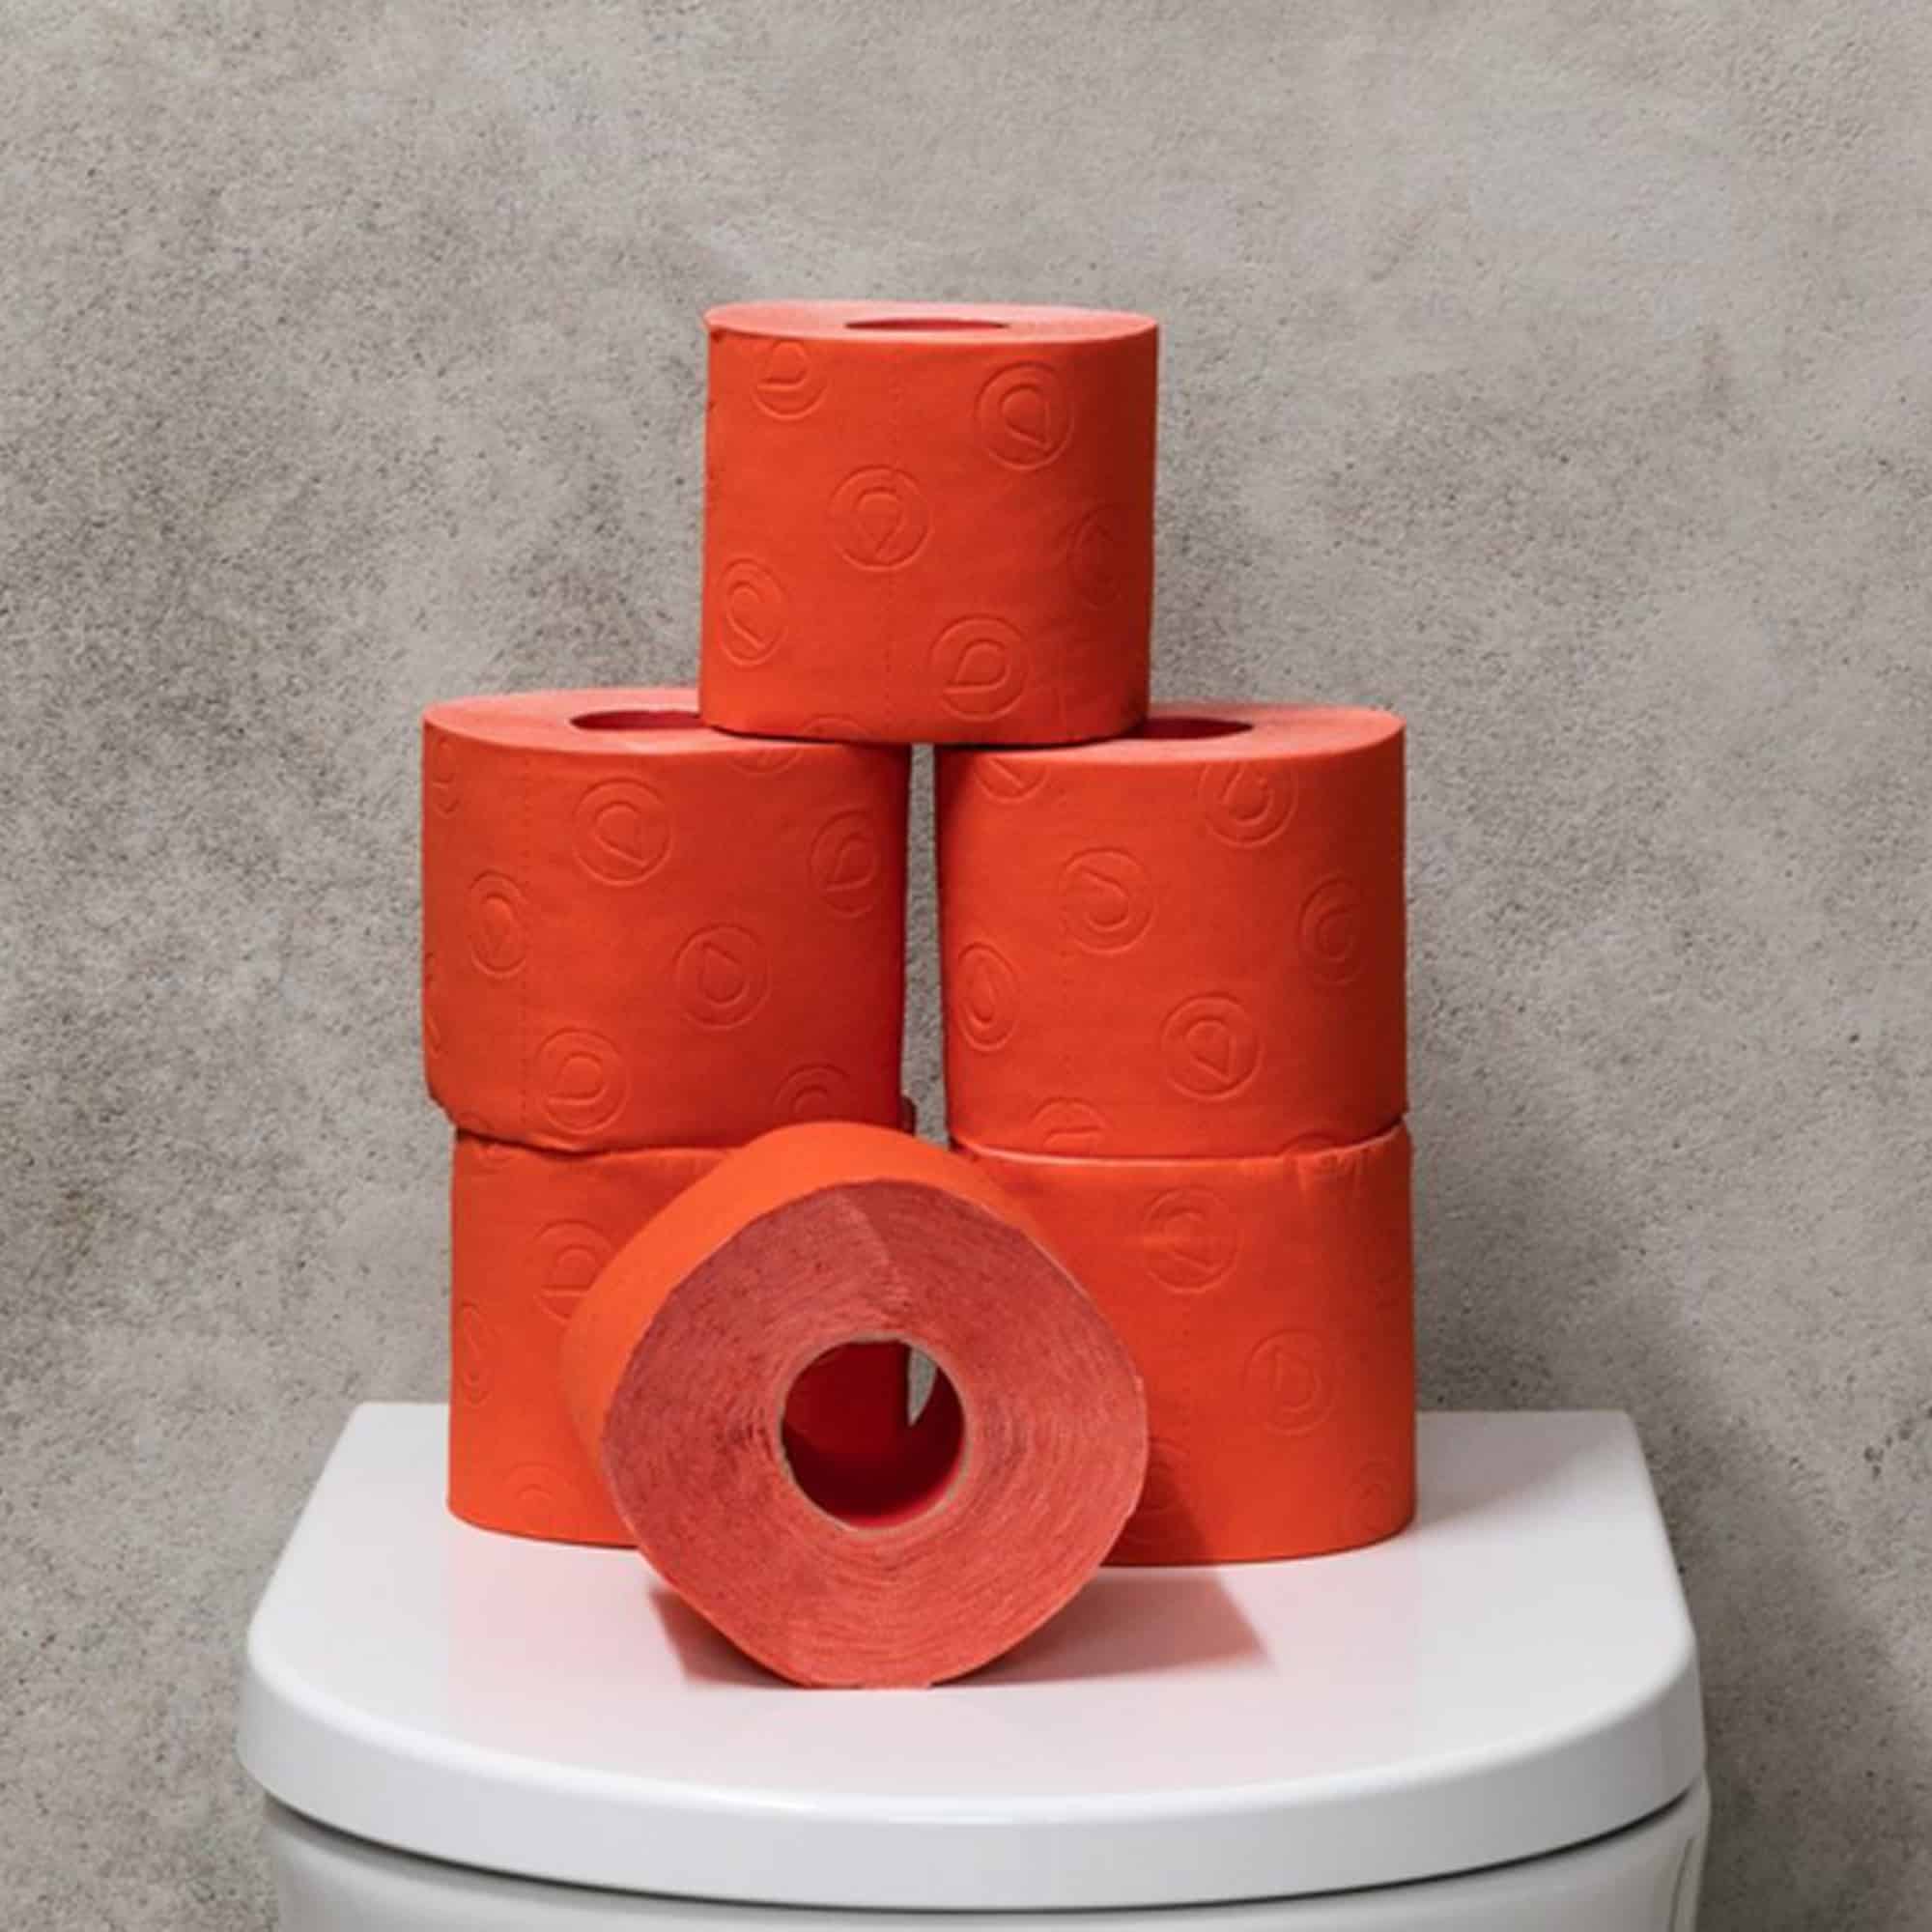 Renova - Colored Toilet Tissue - Touch of Modern